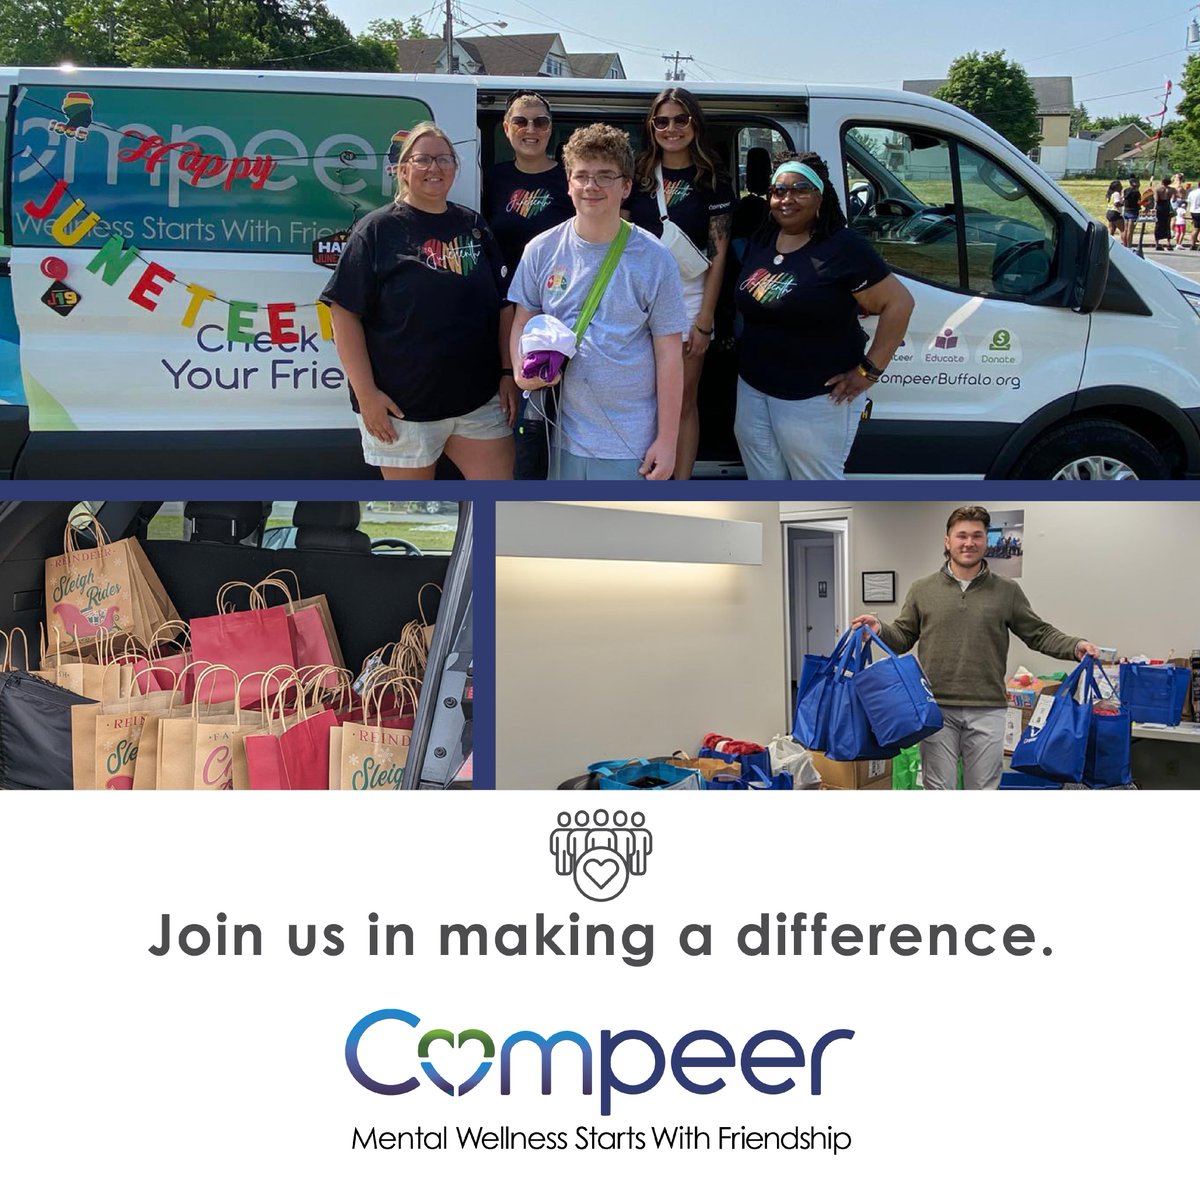 Compeer Buffalo is a non-profit organization dedicated to the improvement of mental health through meaningful friendships with others in the Buffalo community. Donate today using the link compeerbuffalo.org/donate/.